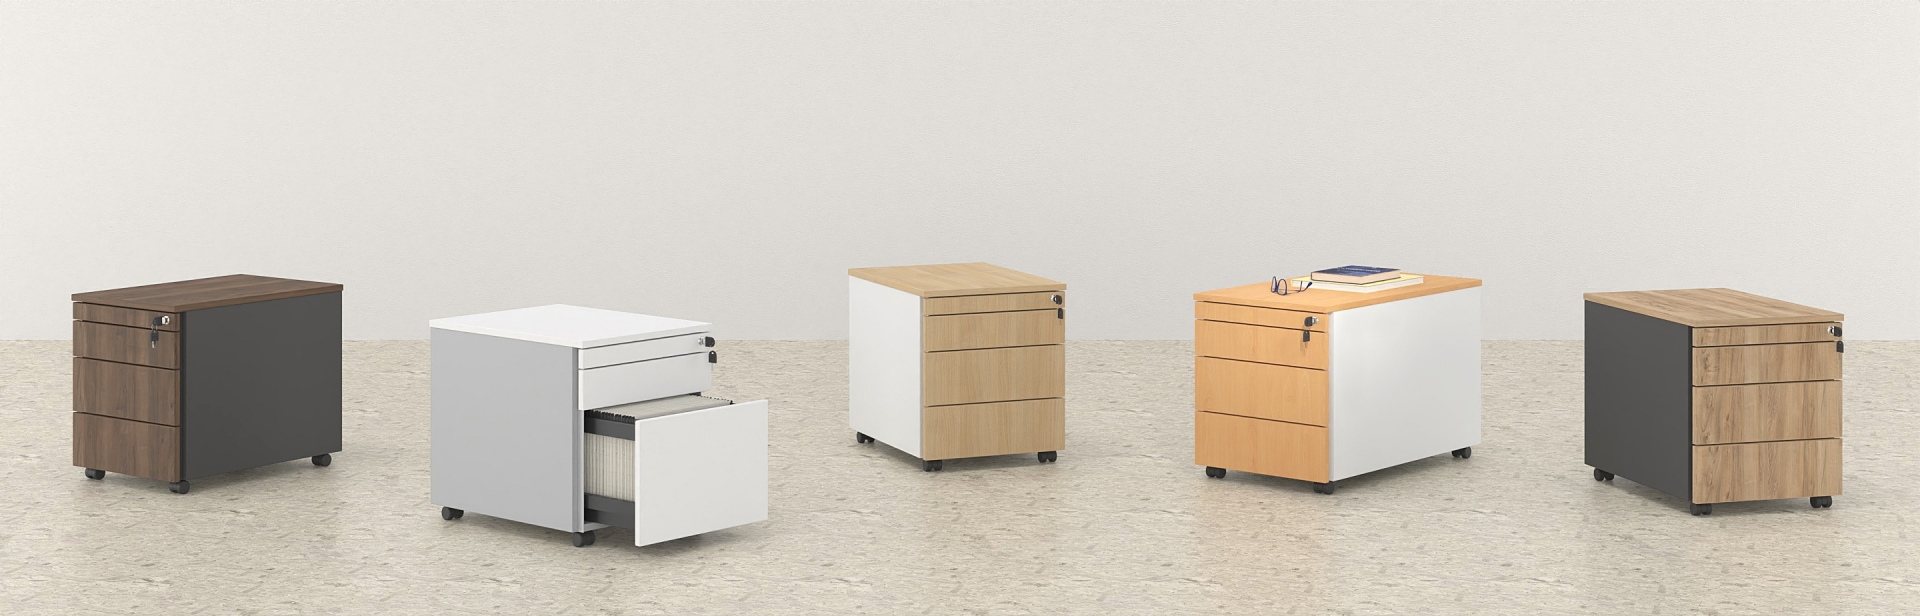 Melamine pedestals in a variety of sizes and colors Dromeas